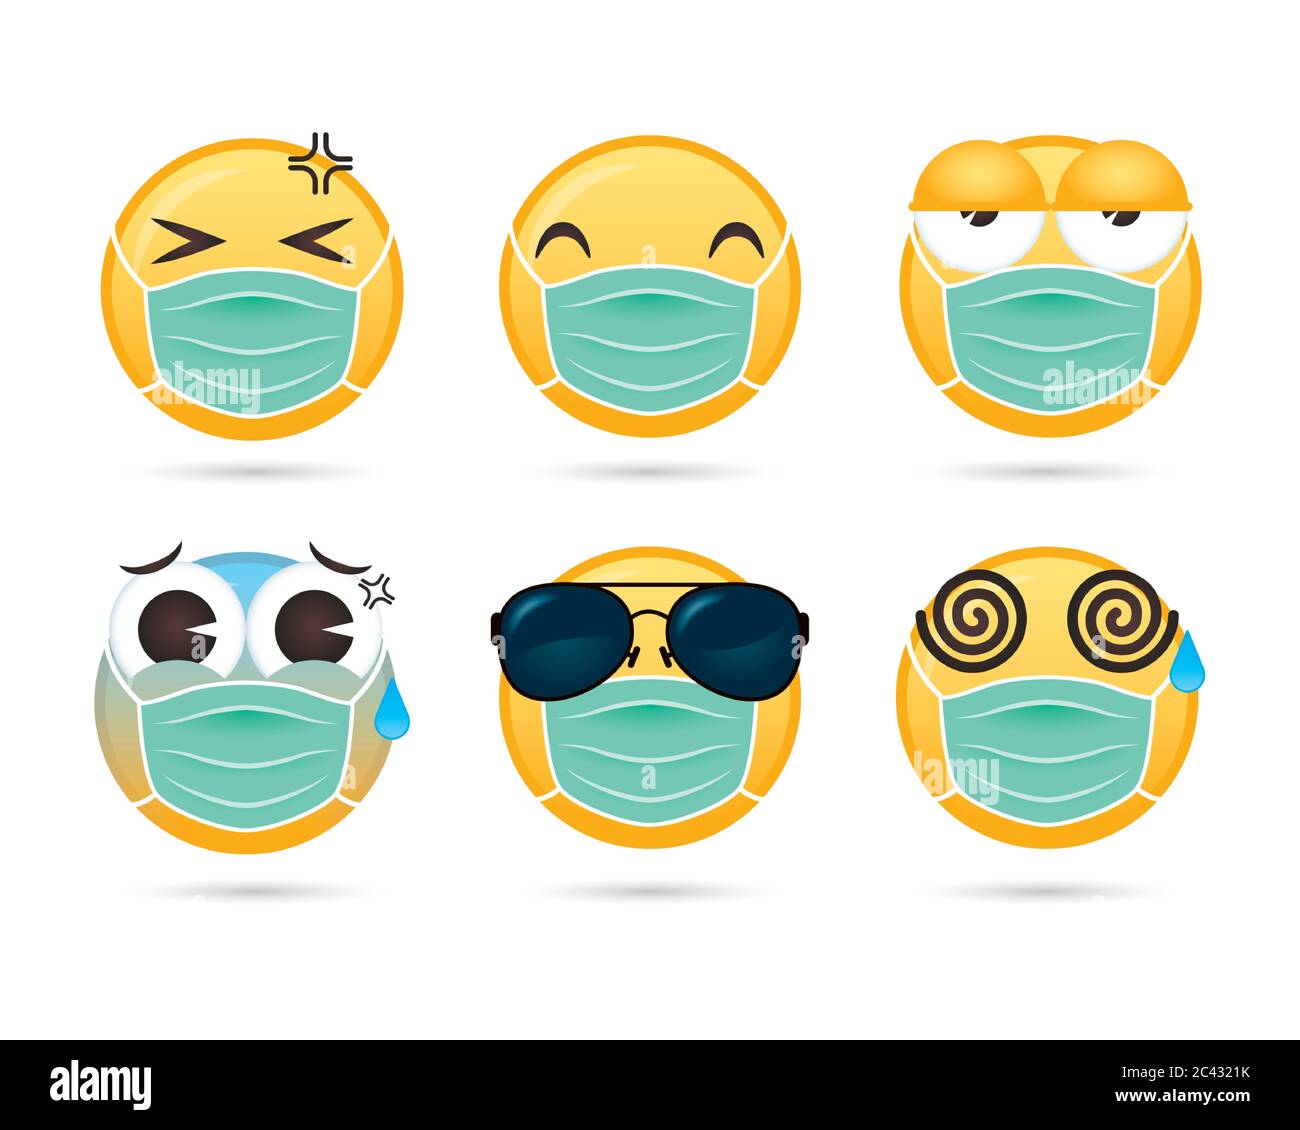 group of emojis faces using medical masks funny characters vector illustration design Stock Vector